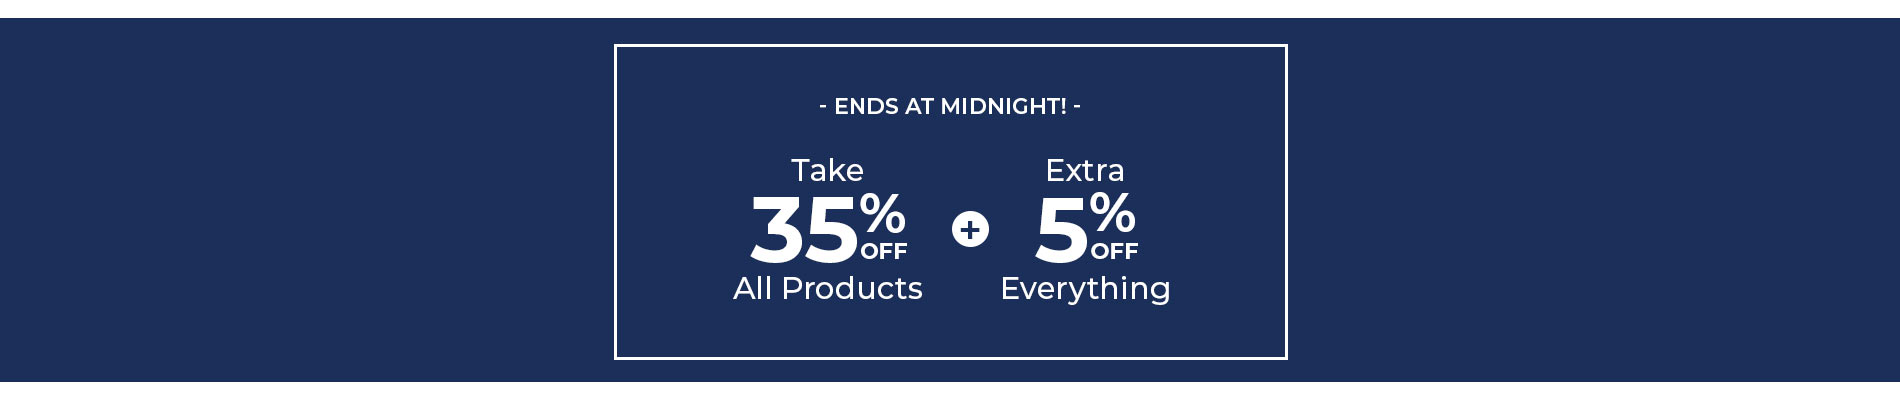 Take 35% + Extra 5% Off